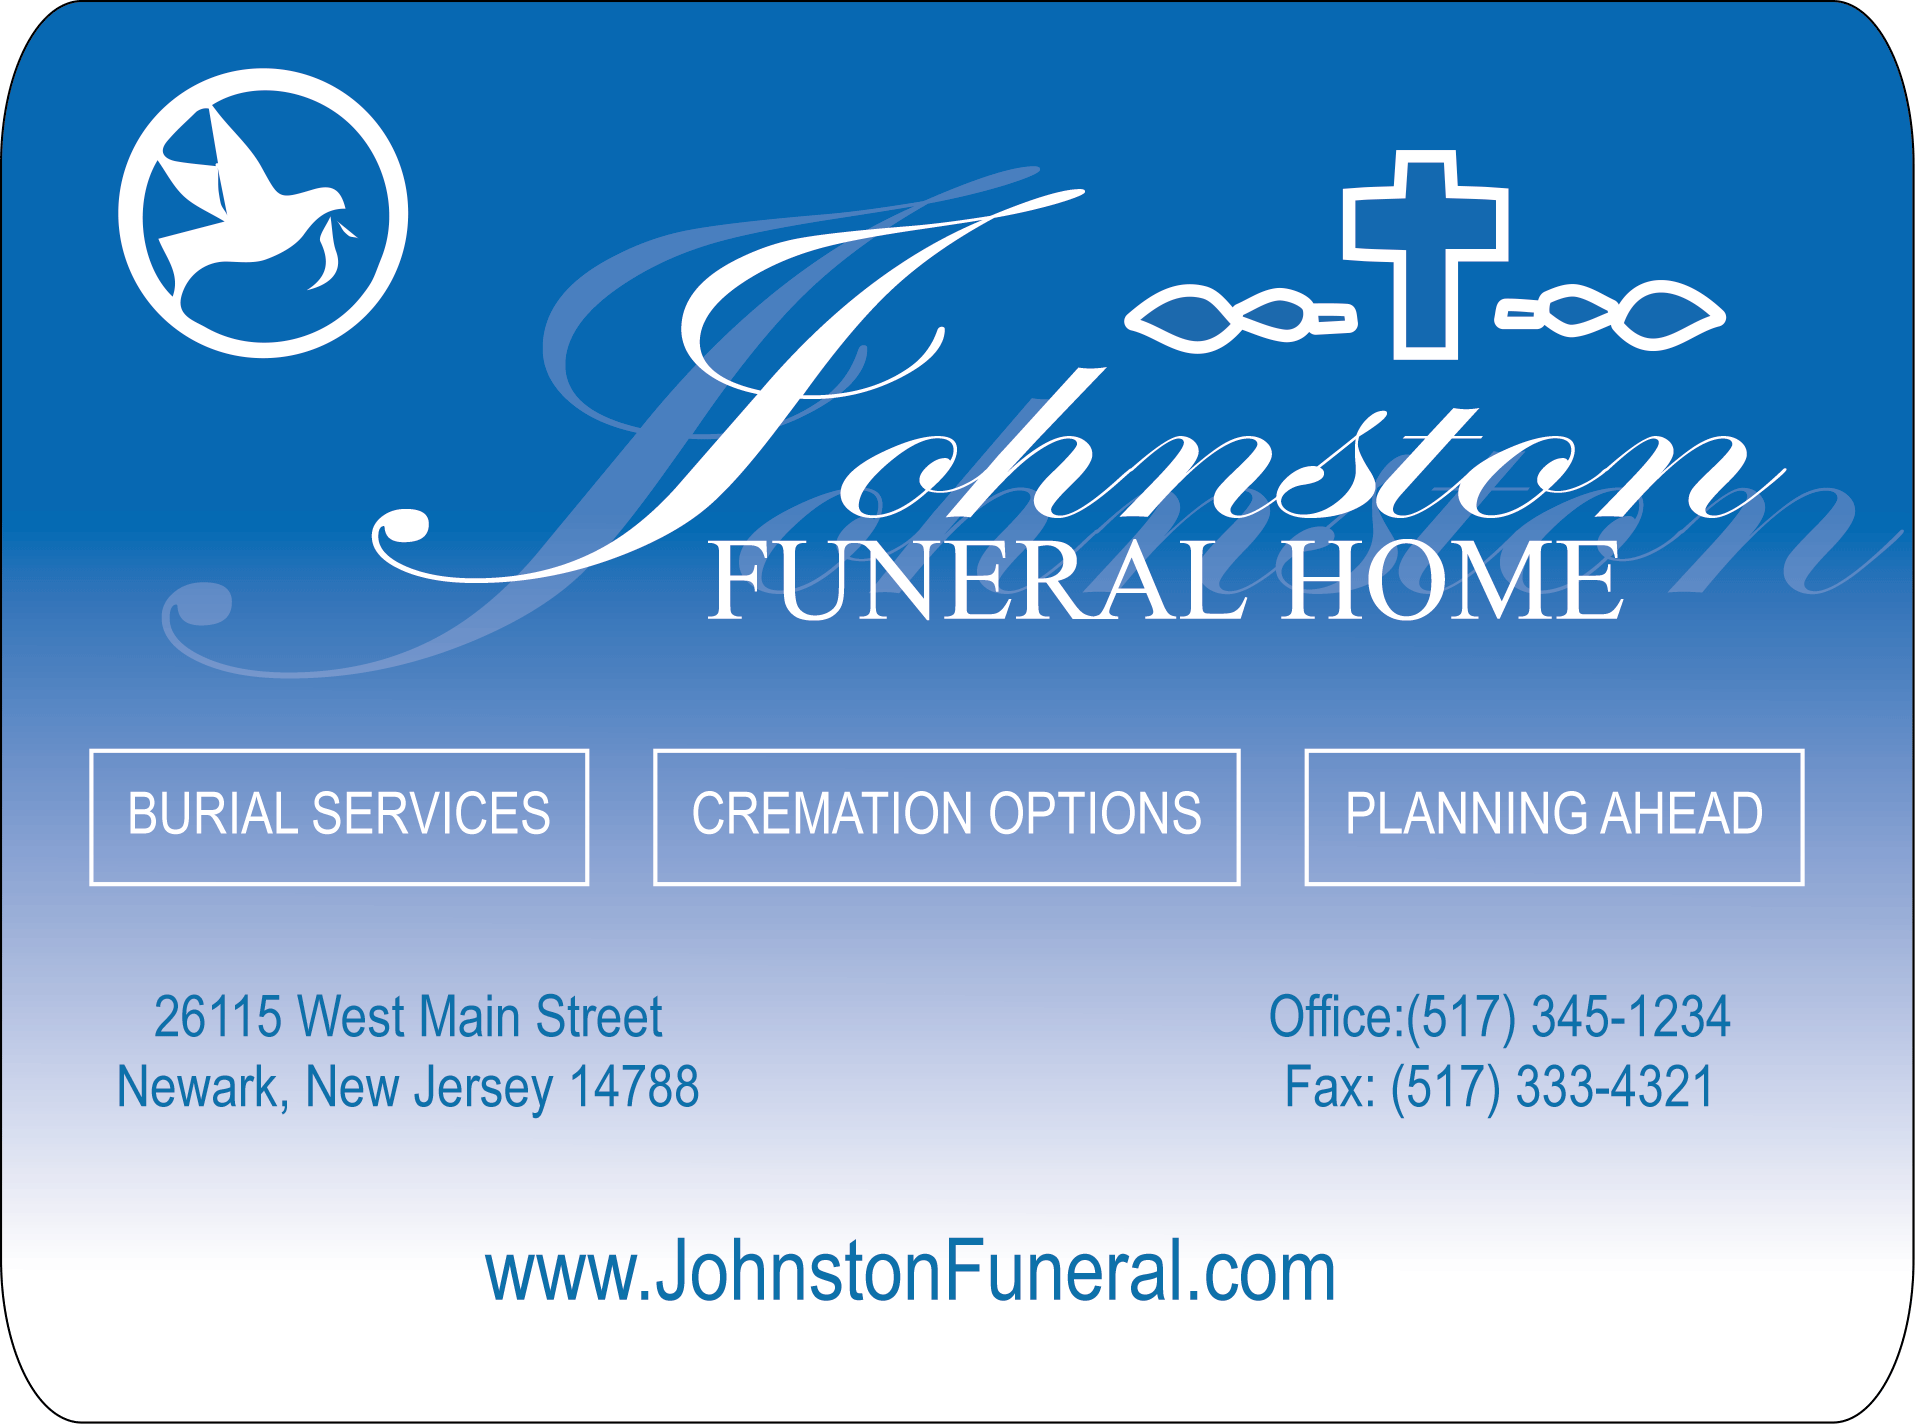 Image - Funeral Home